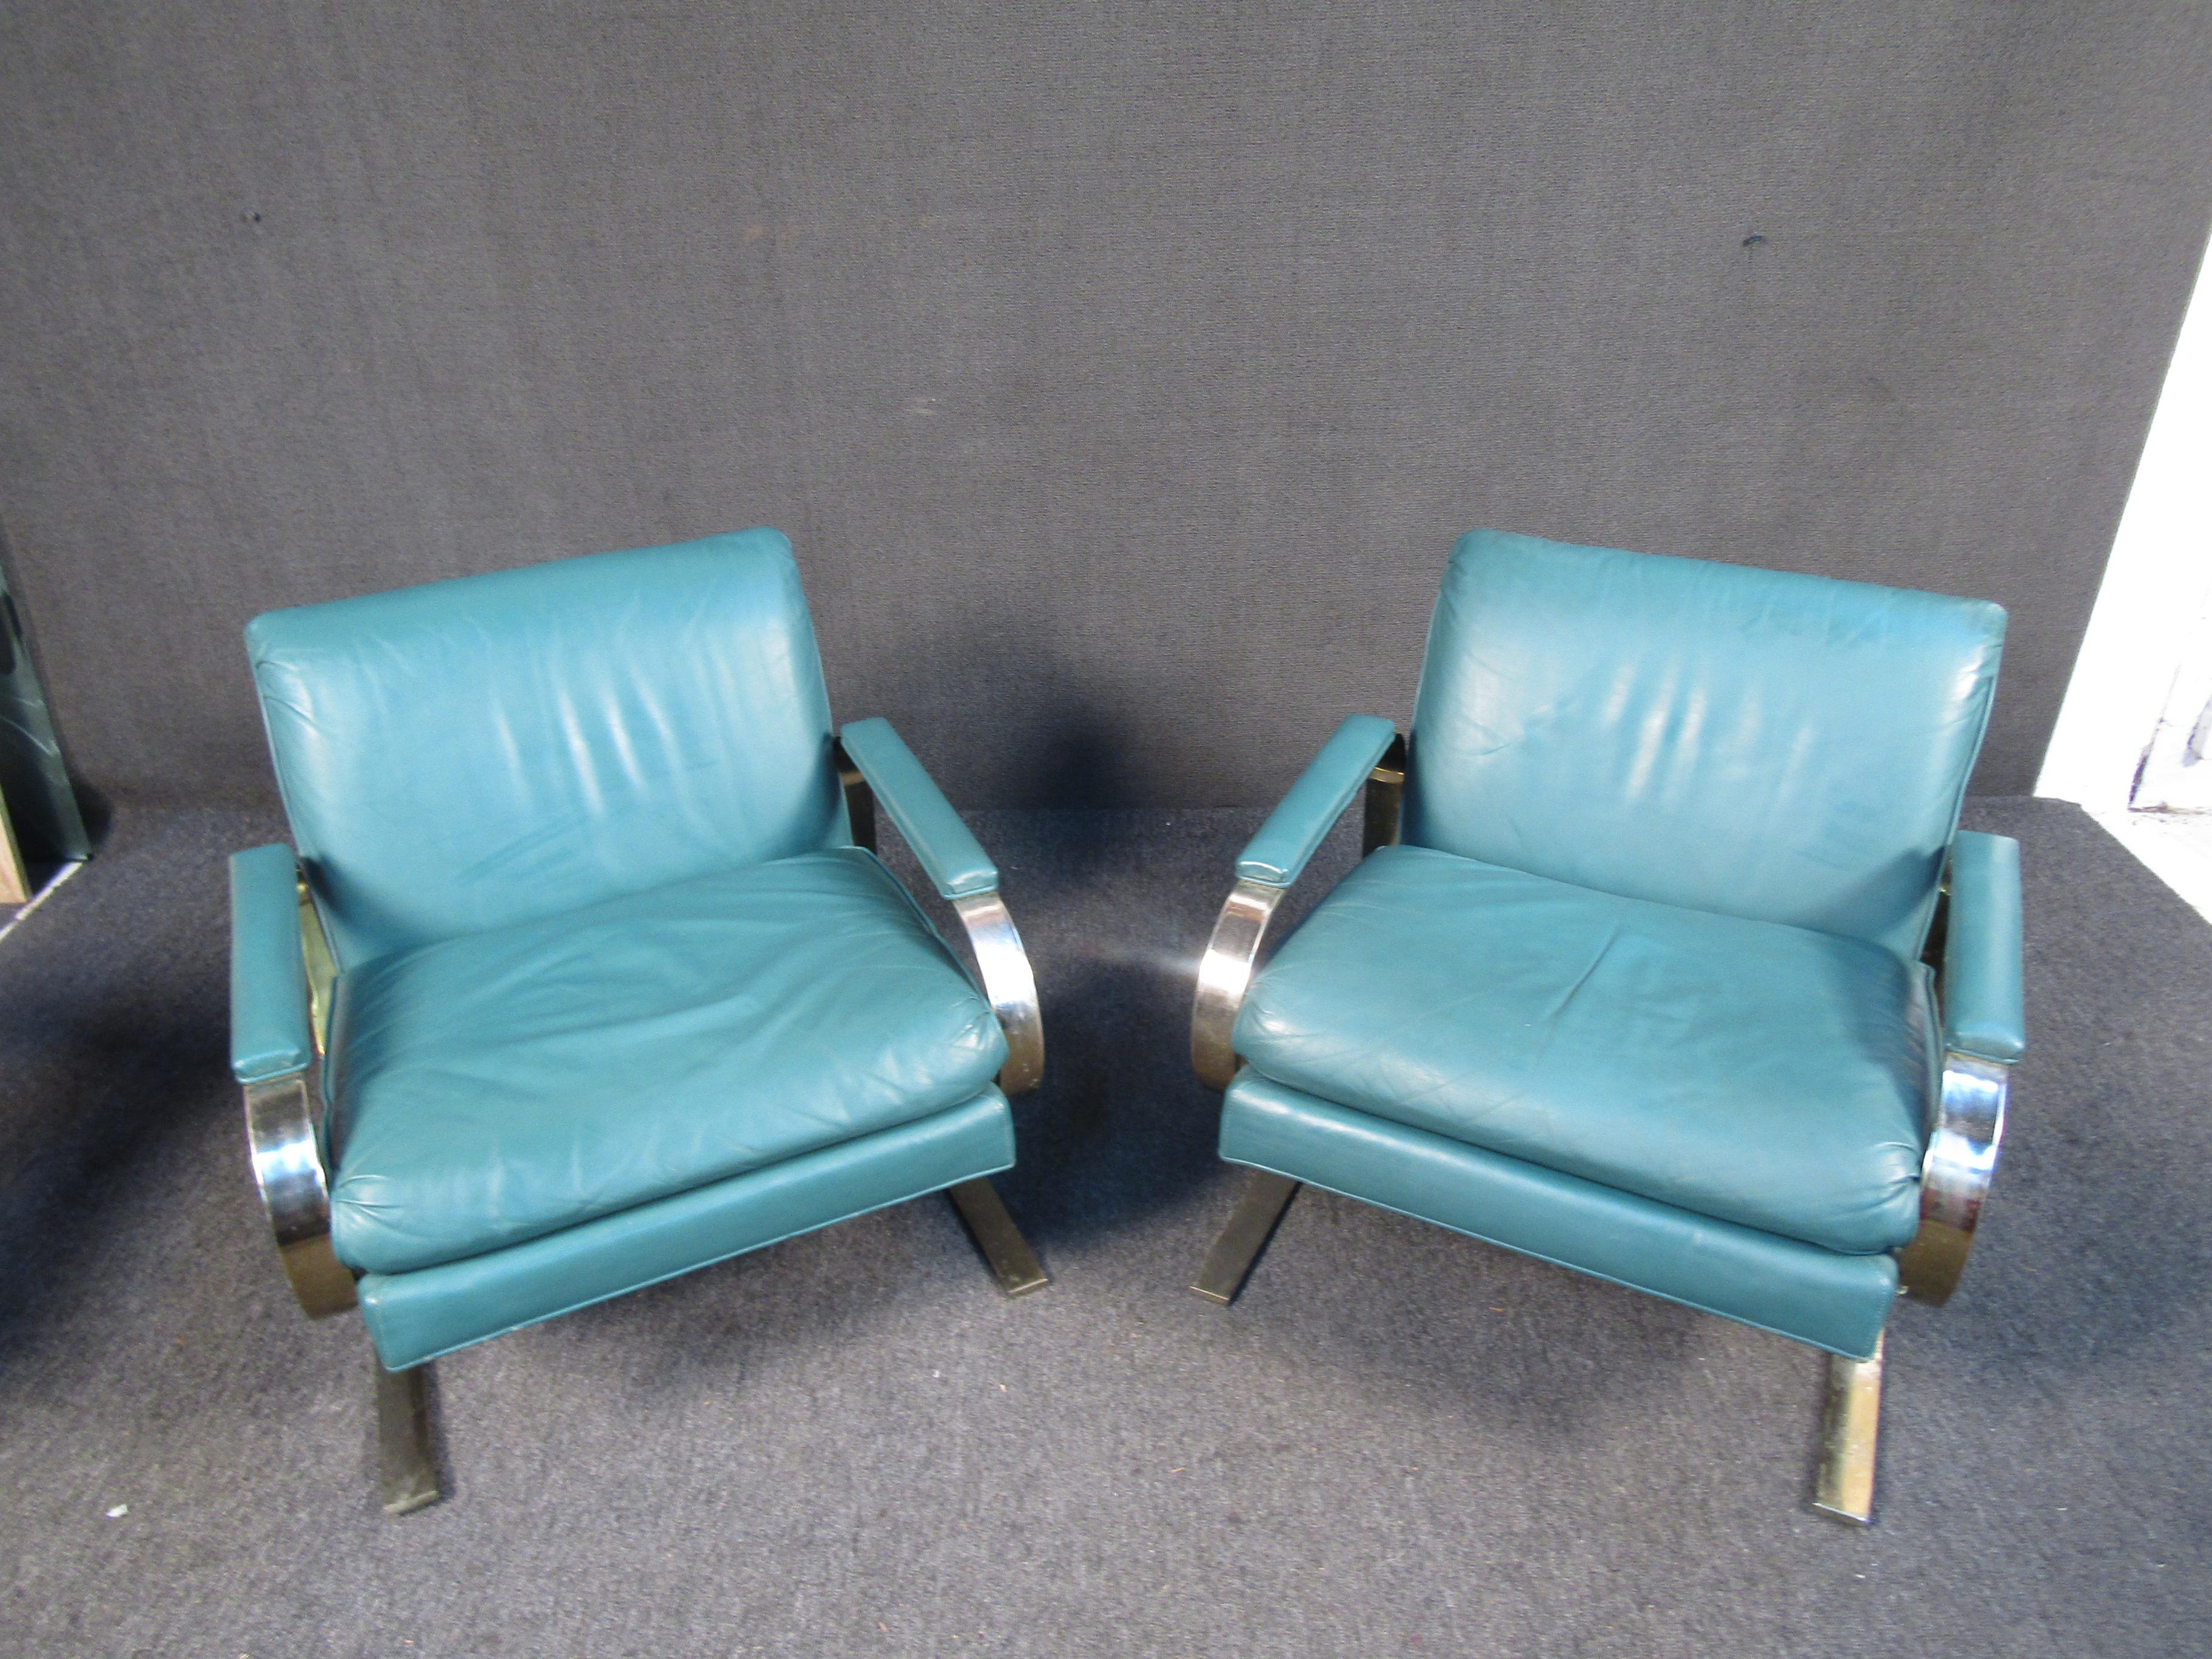 Mid Century Modern Dansen Cantilever lounge chairs in Teal. Absolute Stunning Pair of Rare Milo Baughman Style Flat-Bar Dansen Lounge chairs.Chic and Comfortable Pair of Mid Century Designer Chairs with a Very Cool Flat Frame that adds not only to